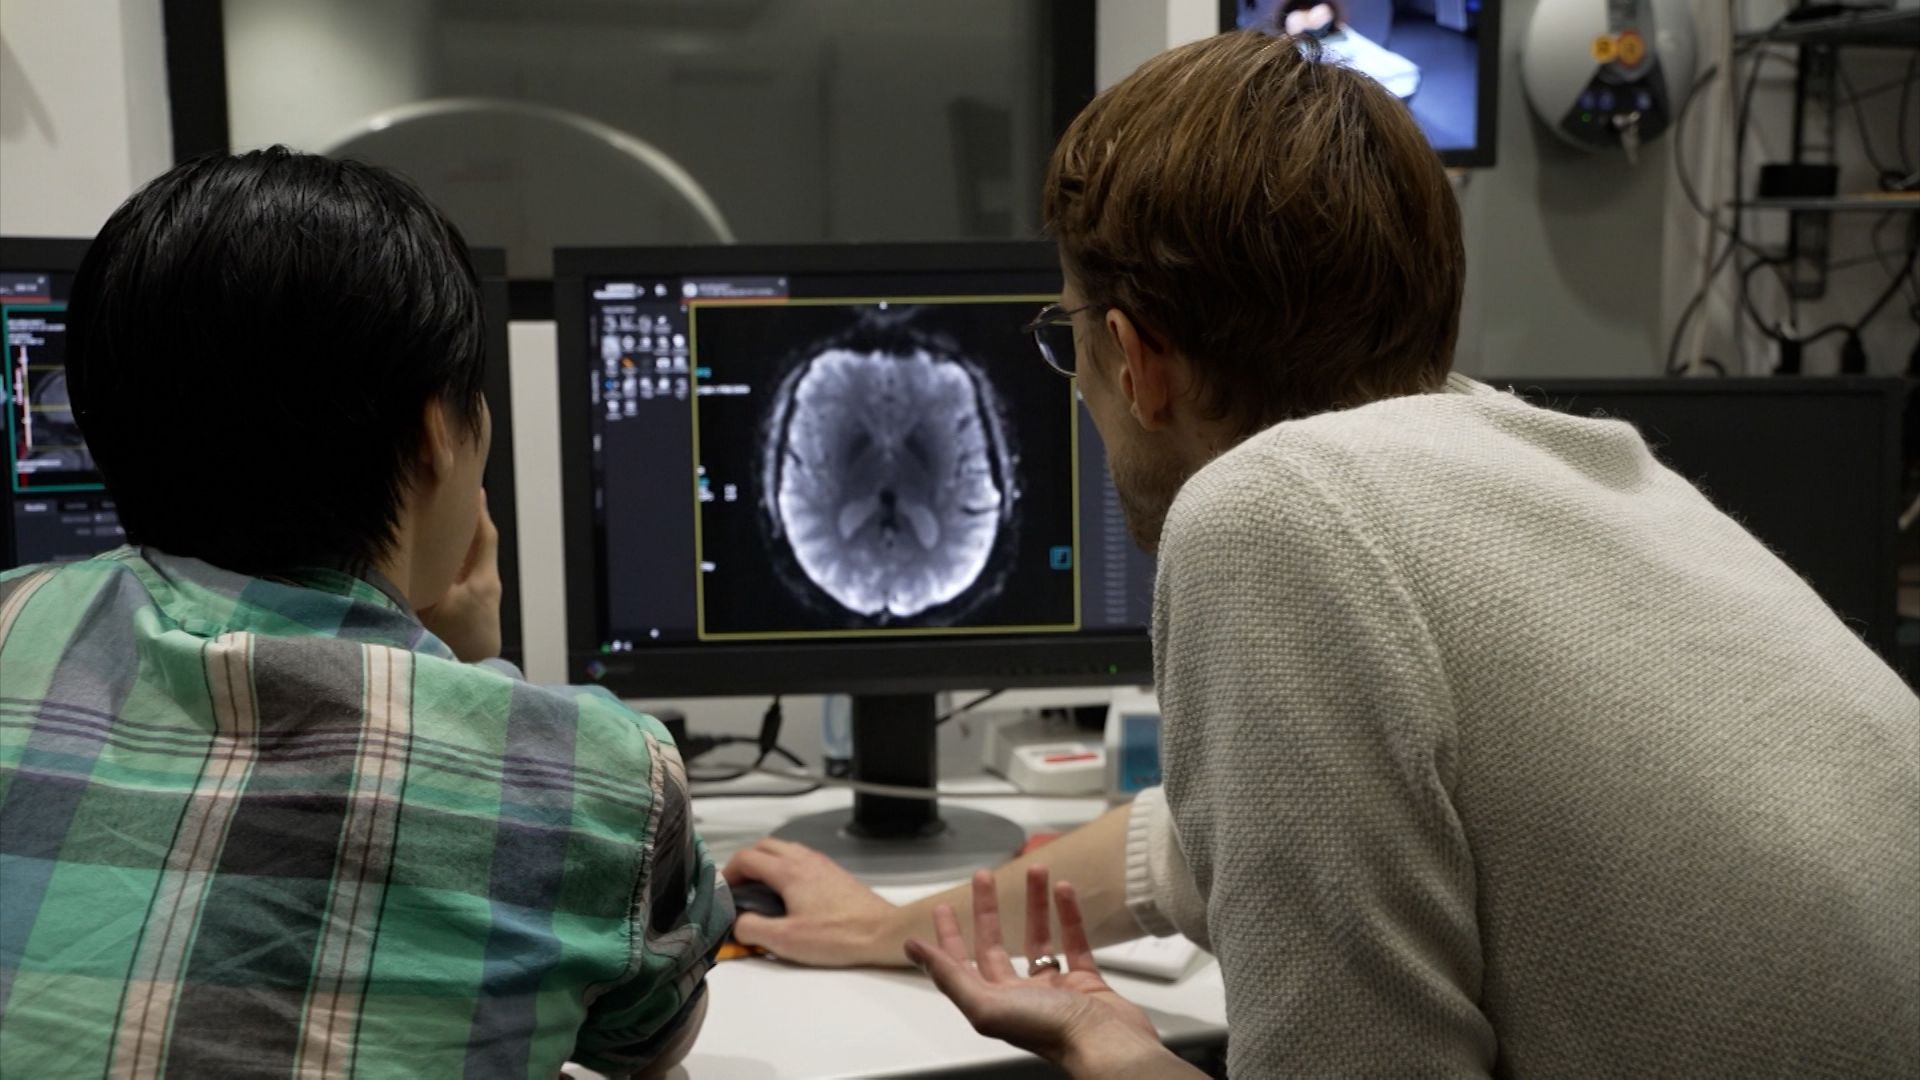 Scientists use brain scans and AI to 'decode' thoughts - The Japan